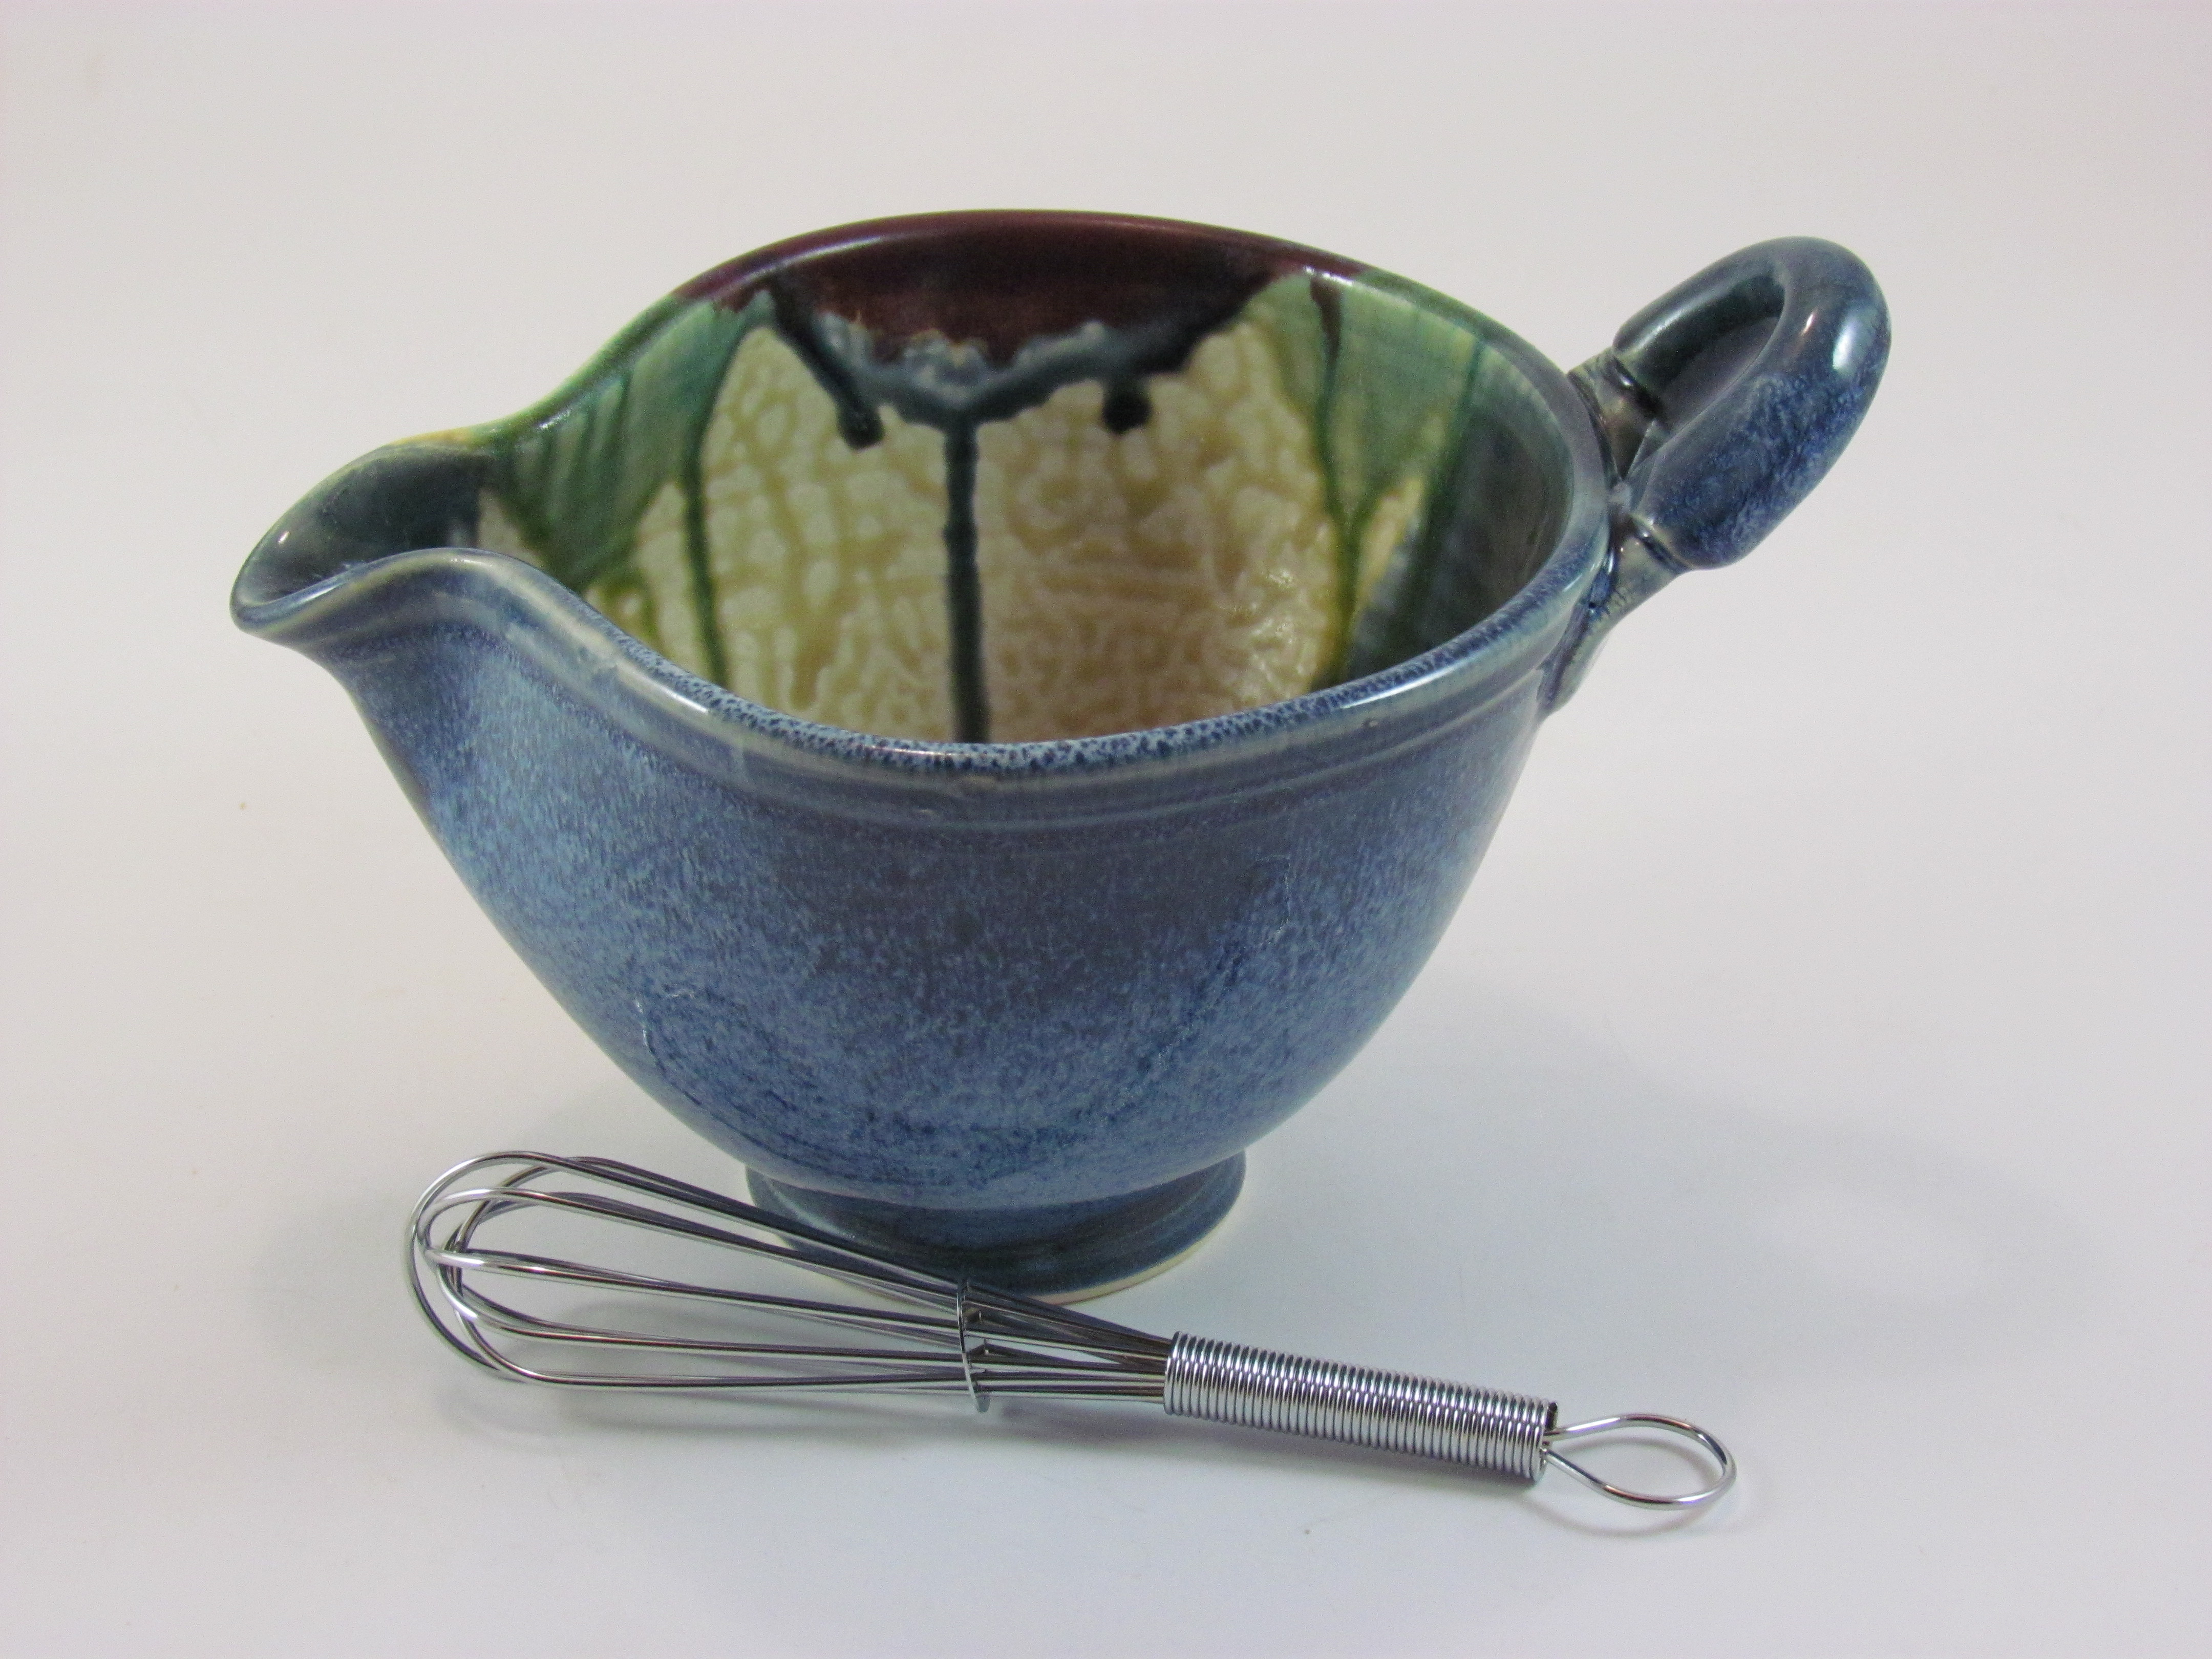 https://www.claycoyote.com/wp-content/uploads/2018/06/Small-blue-mixing-bowl-side.jpg